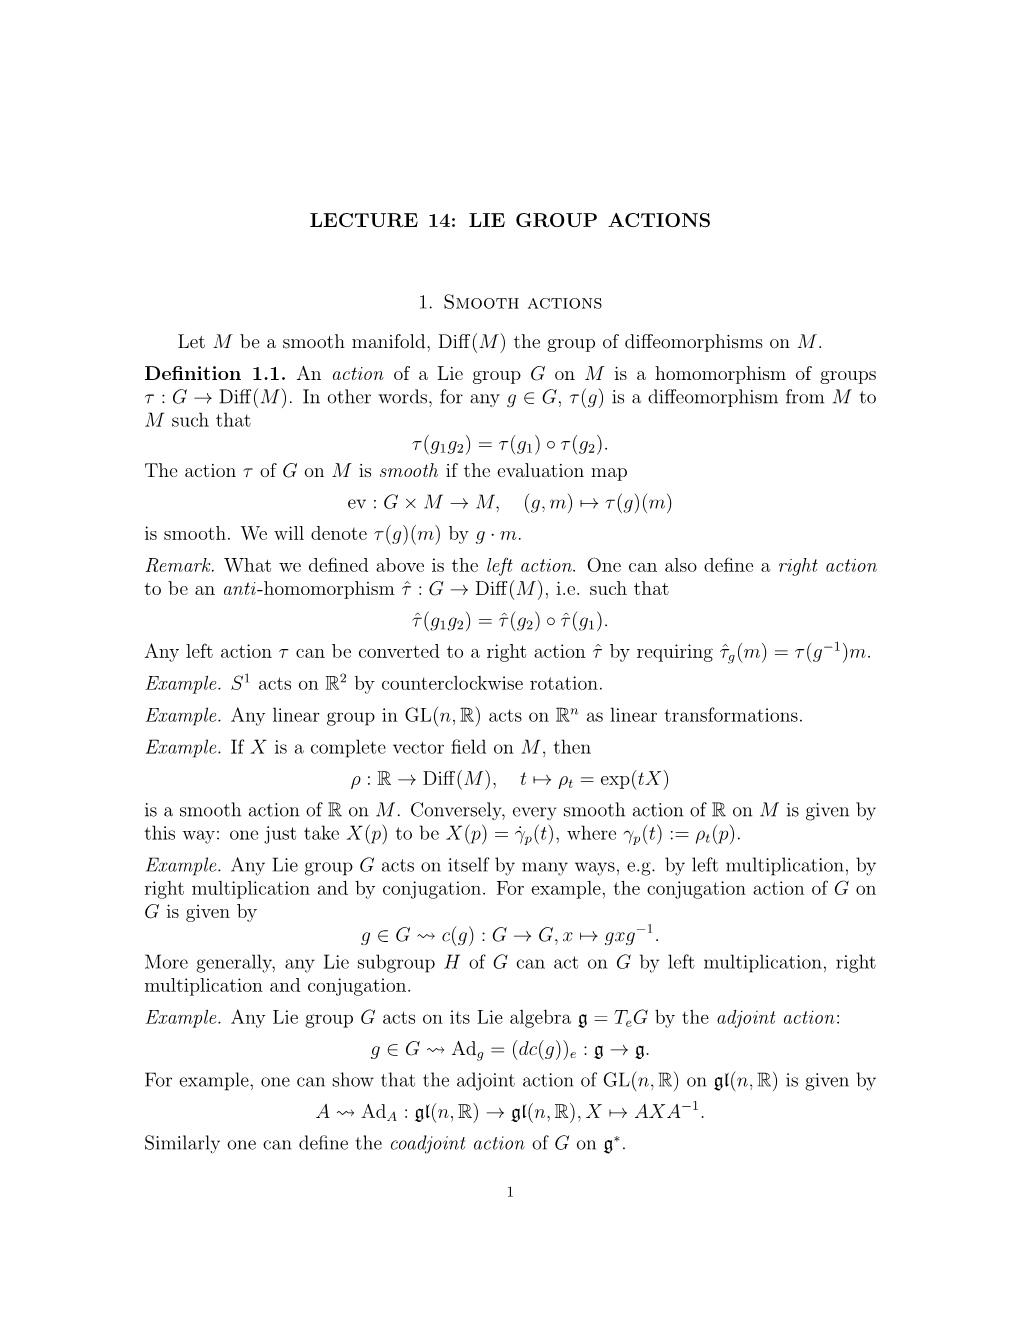 LIE GROUP ACTIONS 1. Smooth Actions Let M Be a Smooth Manifold